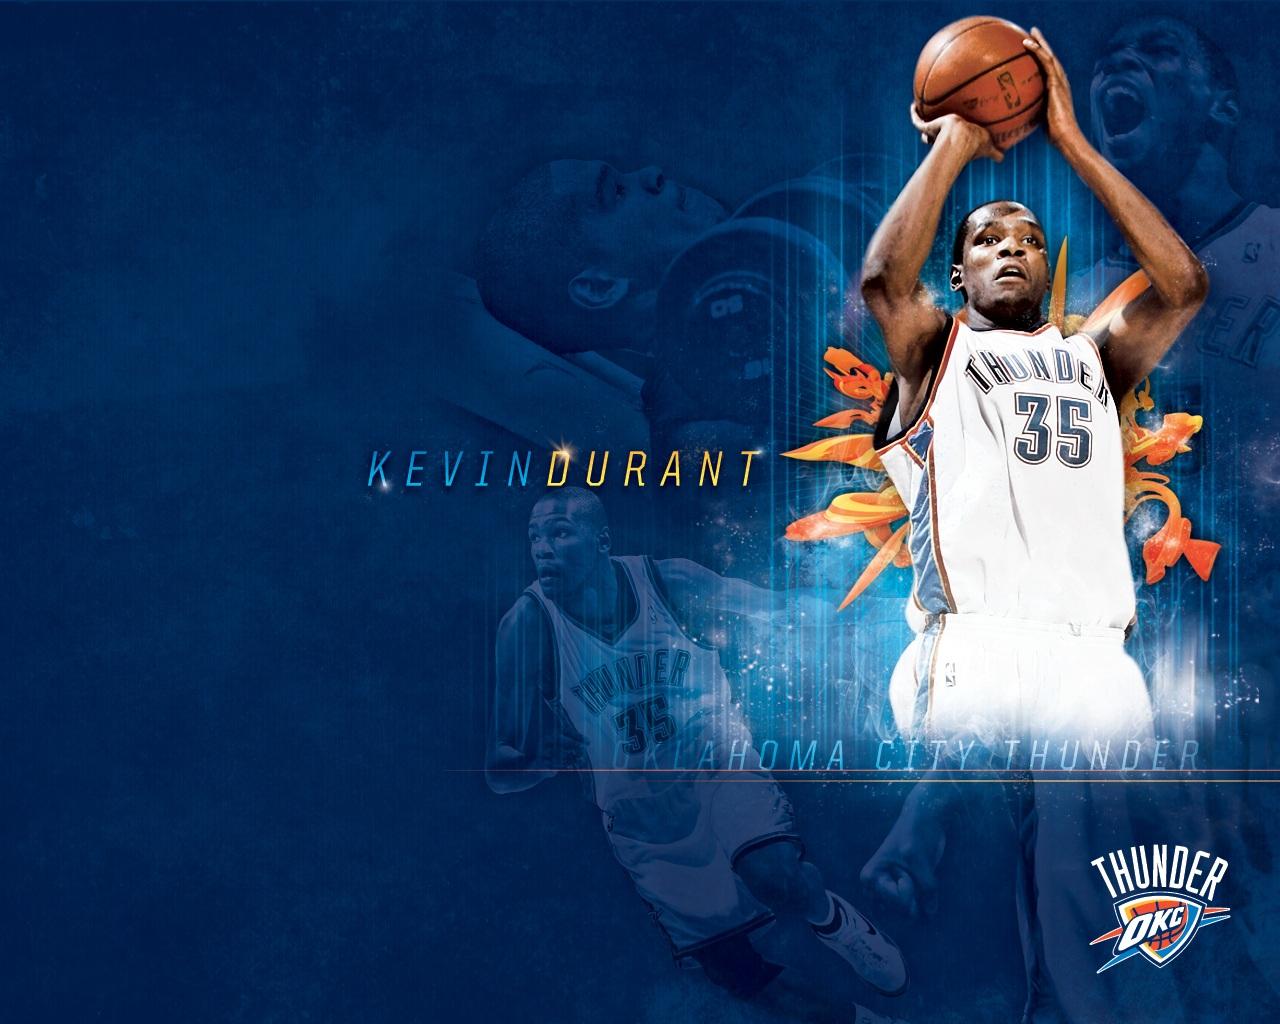 Okc Kevin Durant Wallpaper Normal Photo Shared By Timothy35 Fans